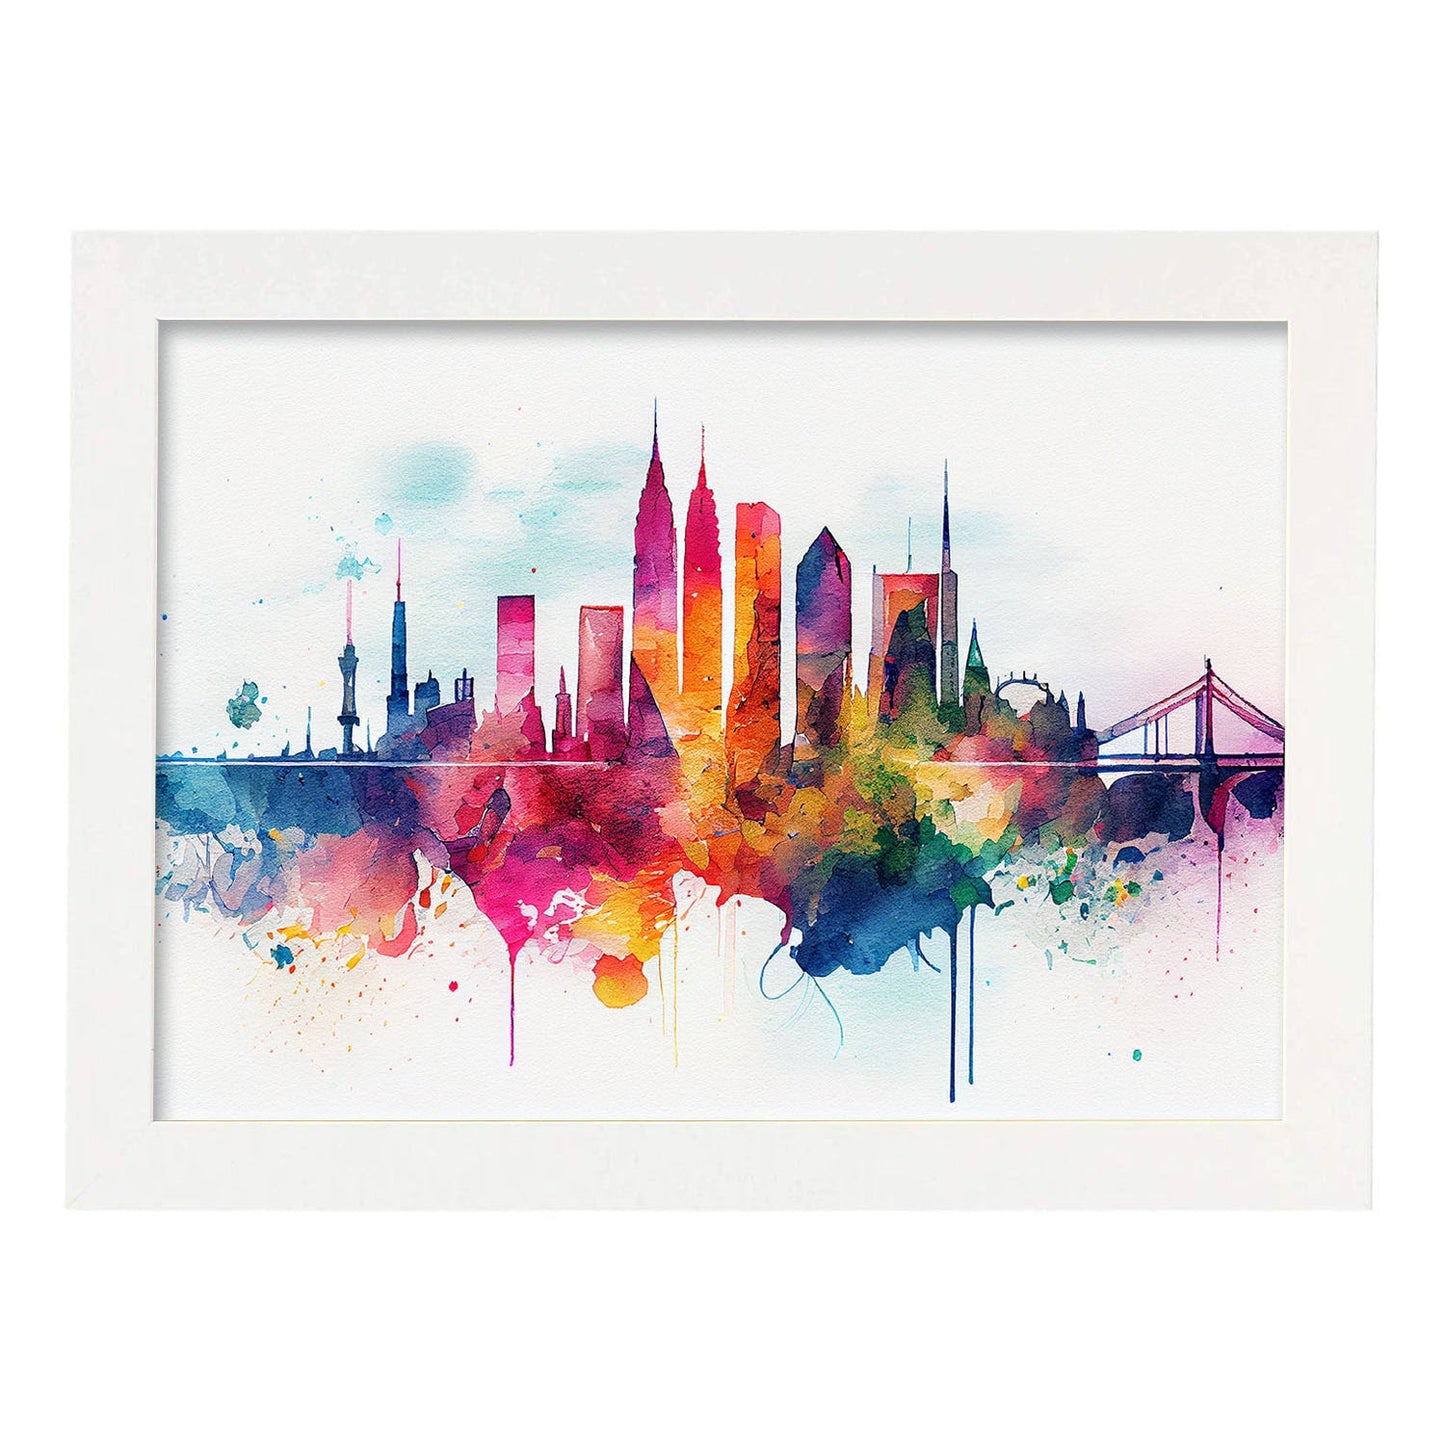 Nacnic watercolor of a skyline of the city of Frankfurt. Aesthetic Wall Art Prints for Bedroom or Living Room Design.-Artwork-Nacnic-A4-Marco Blanco-Nacnic Estudio SL